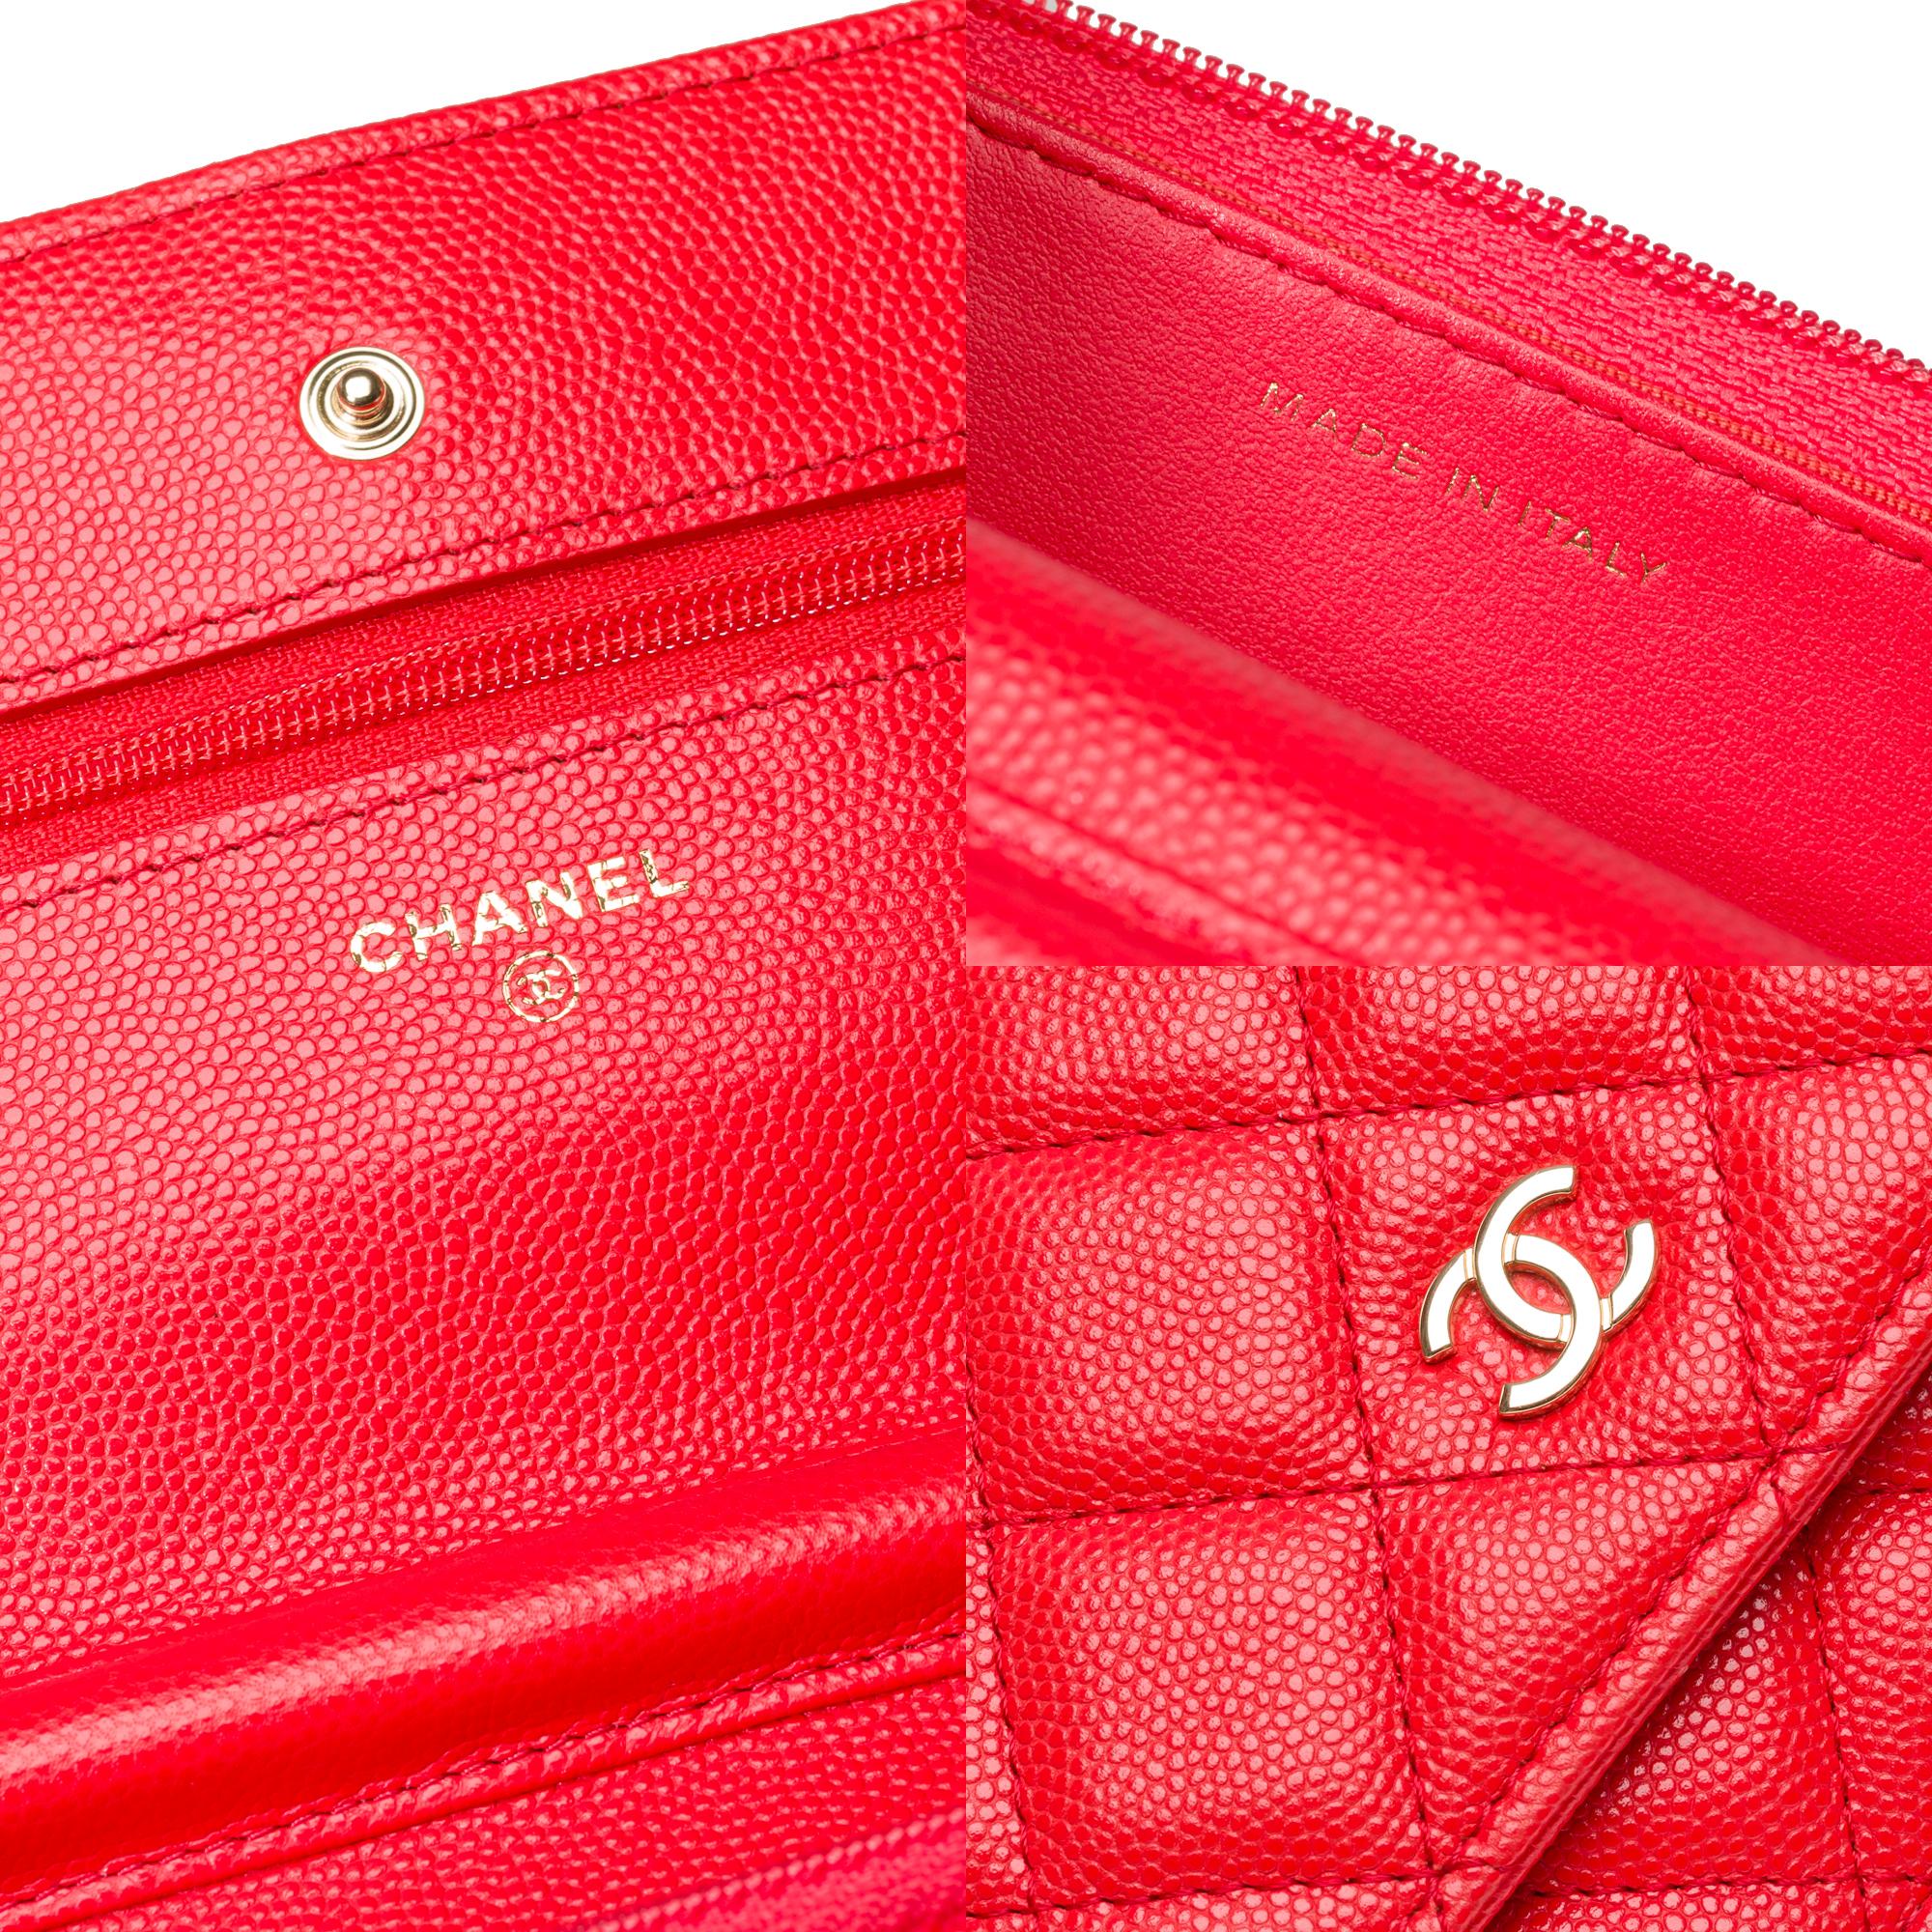 Chanel Wallet on Chain (WOC)  shoulder bag in Red quilted Caviar leather, GHW For Sale 3